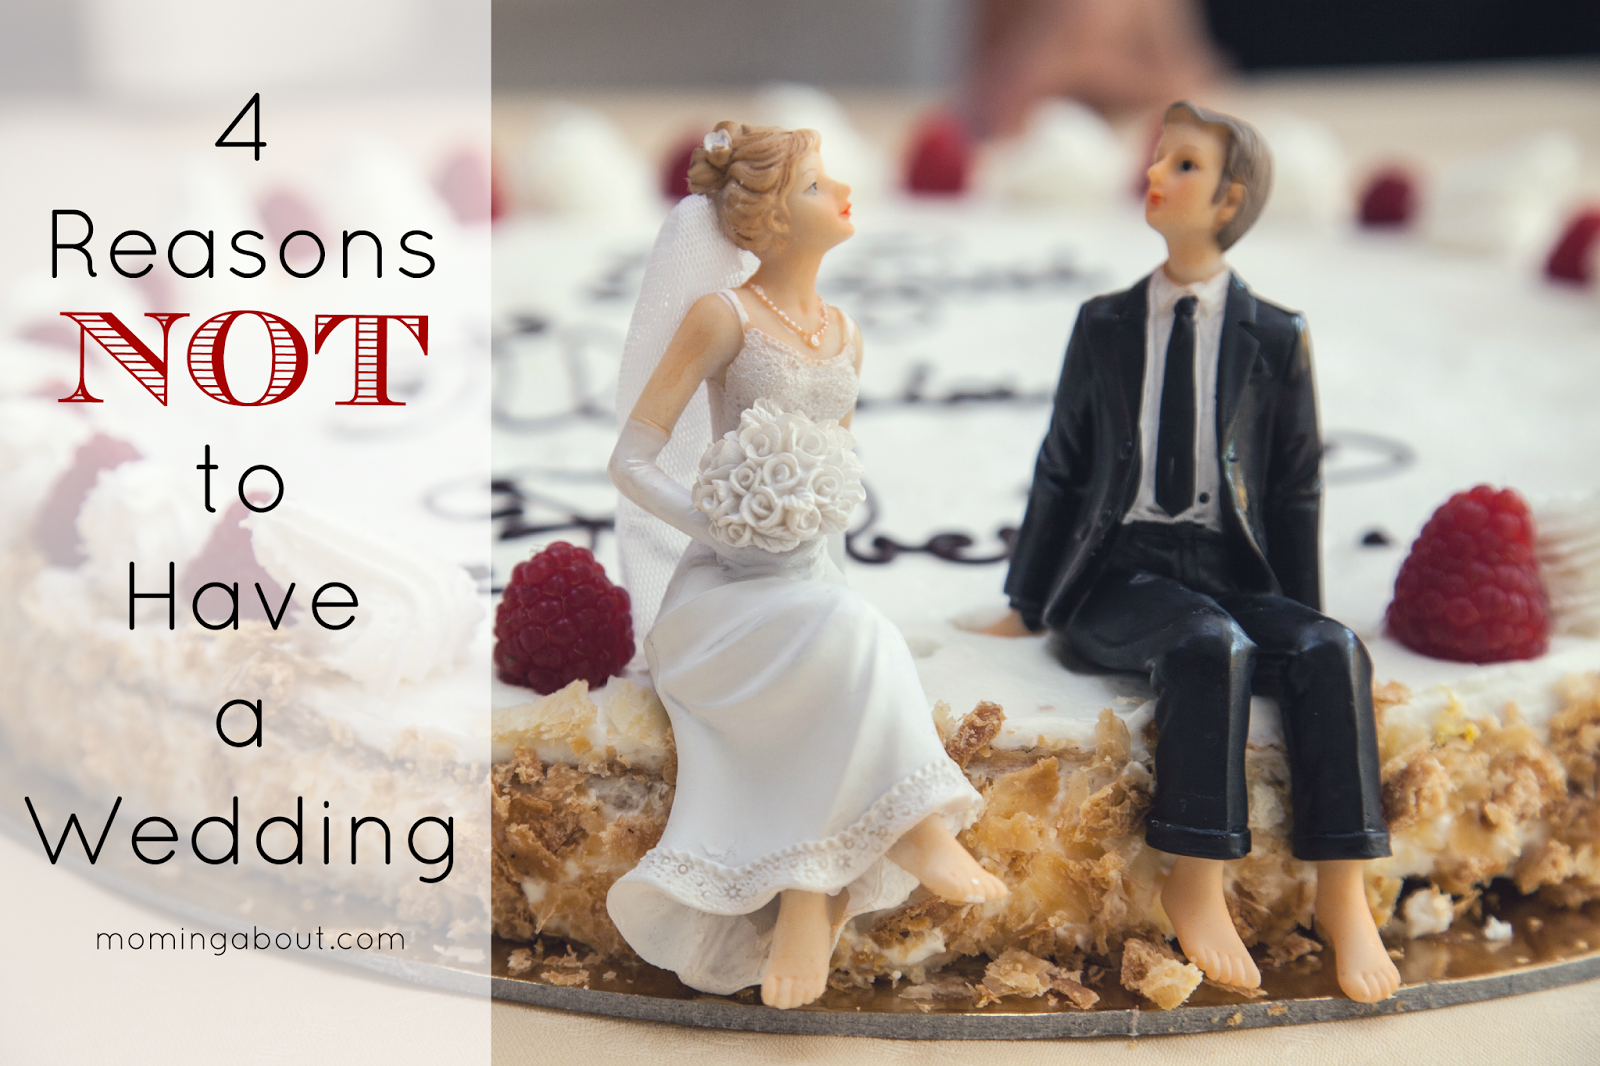 4 Reasons NOT to Have a Wedding